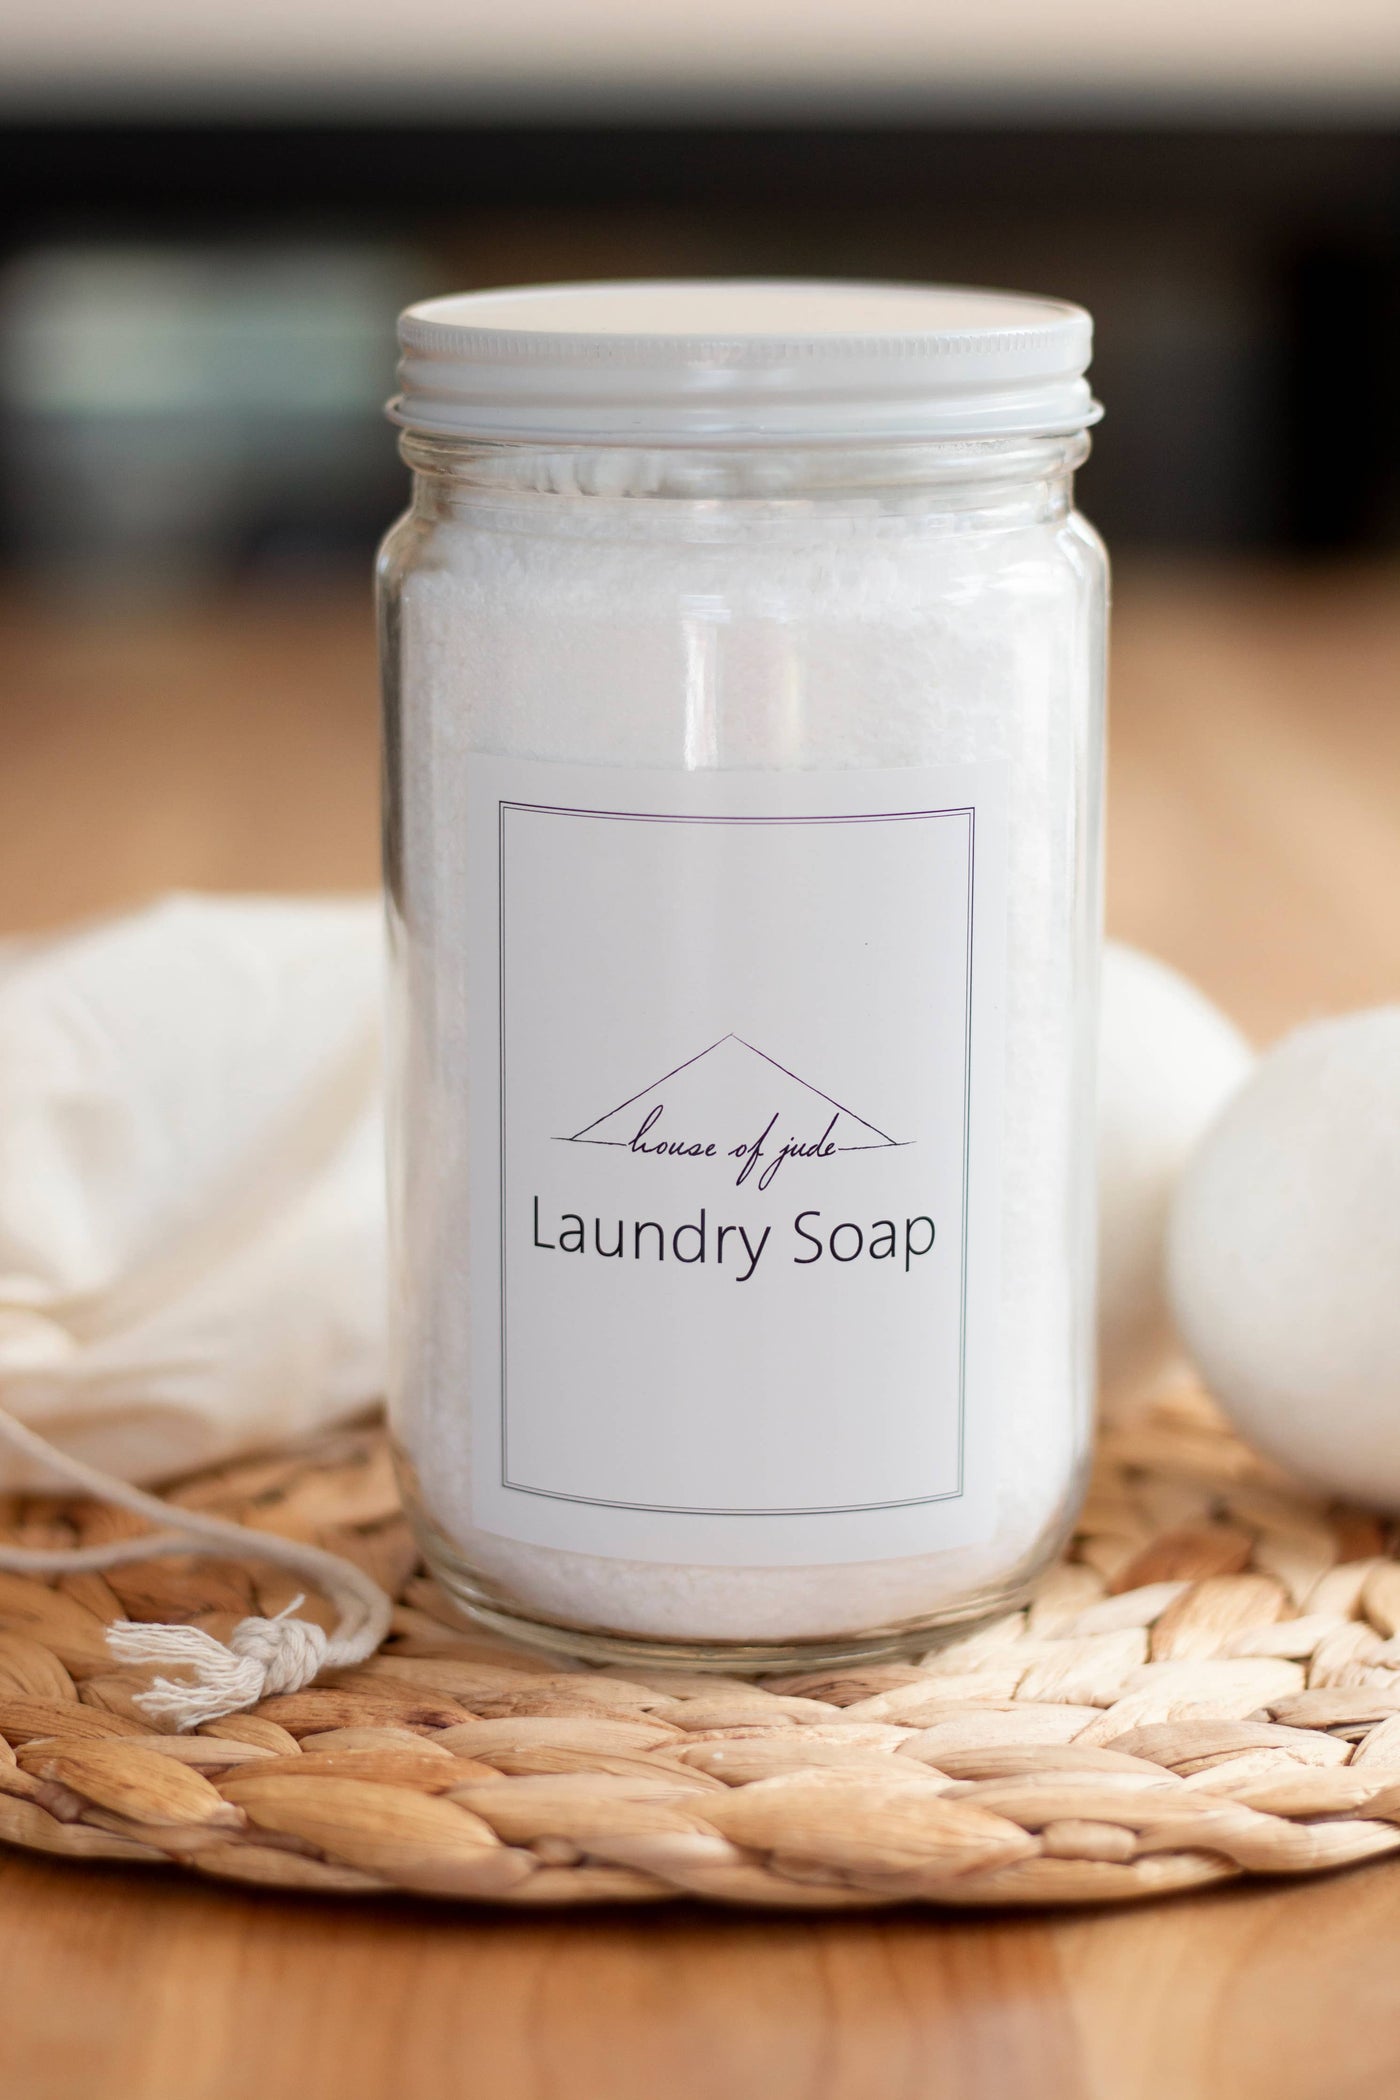 Lavender Laundry Soap - Natural Detergent, 600g jar. Washes about 40 loads. Can be used in top and front load washing machines.